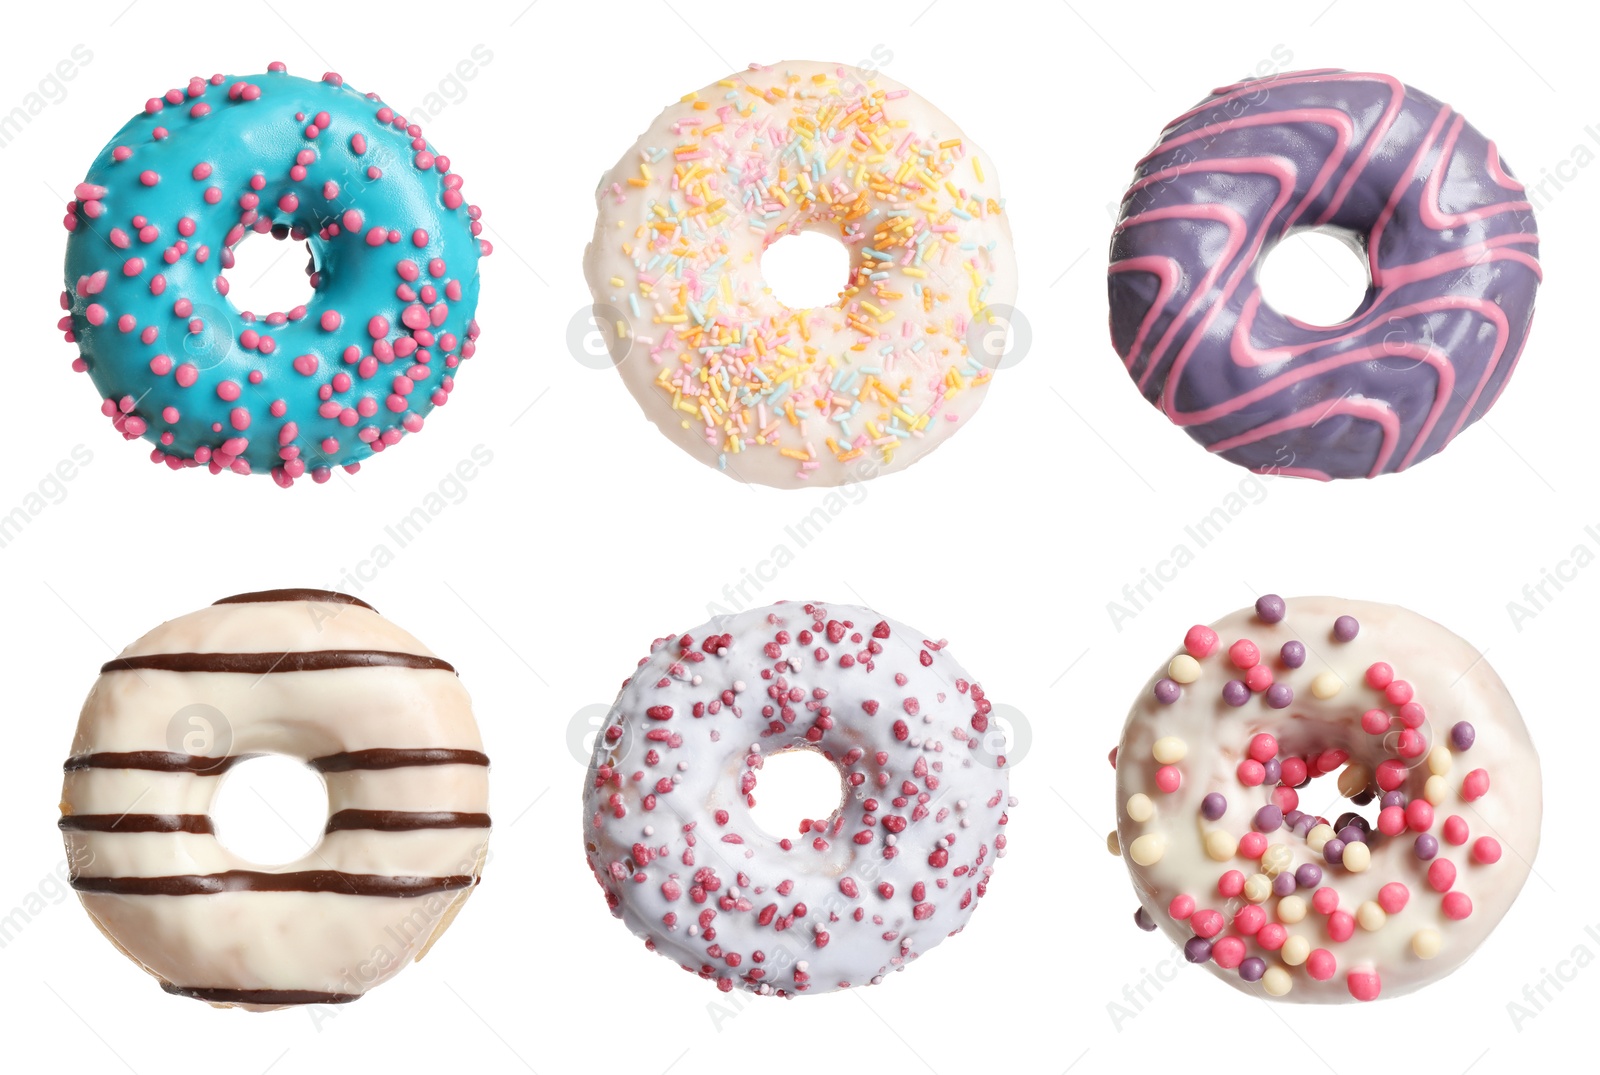 Image of Set with delicious glazed donuts on white background